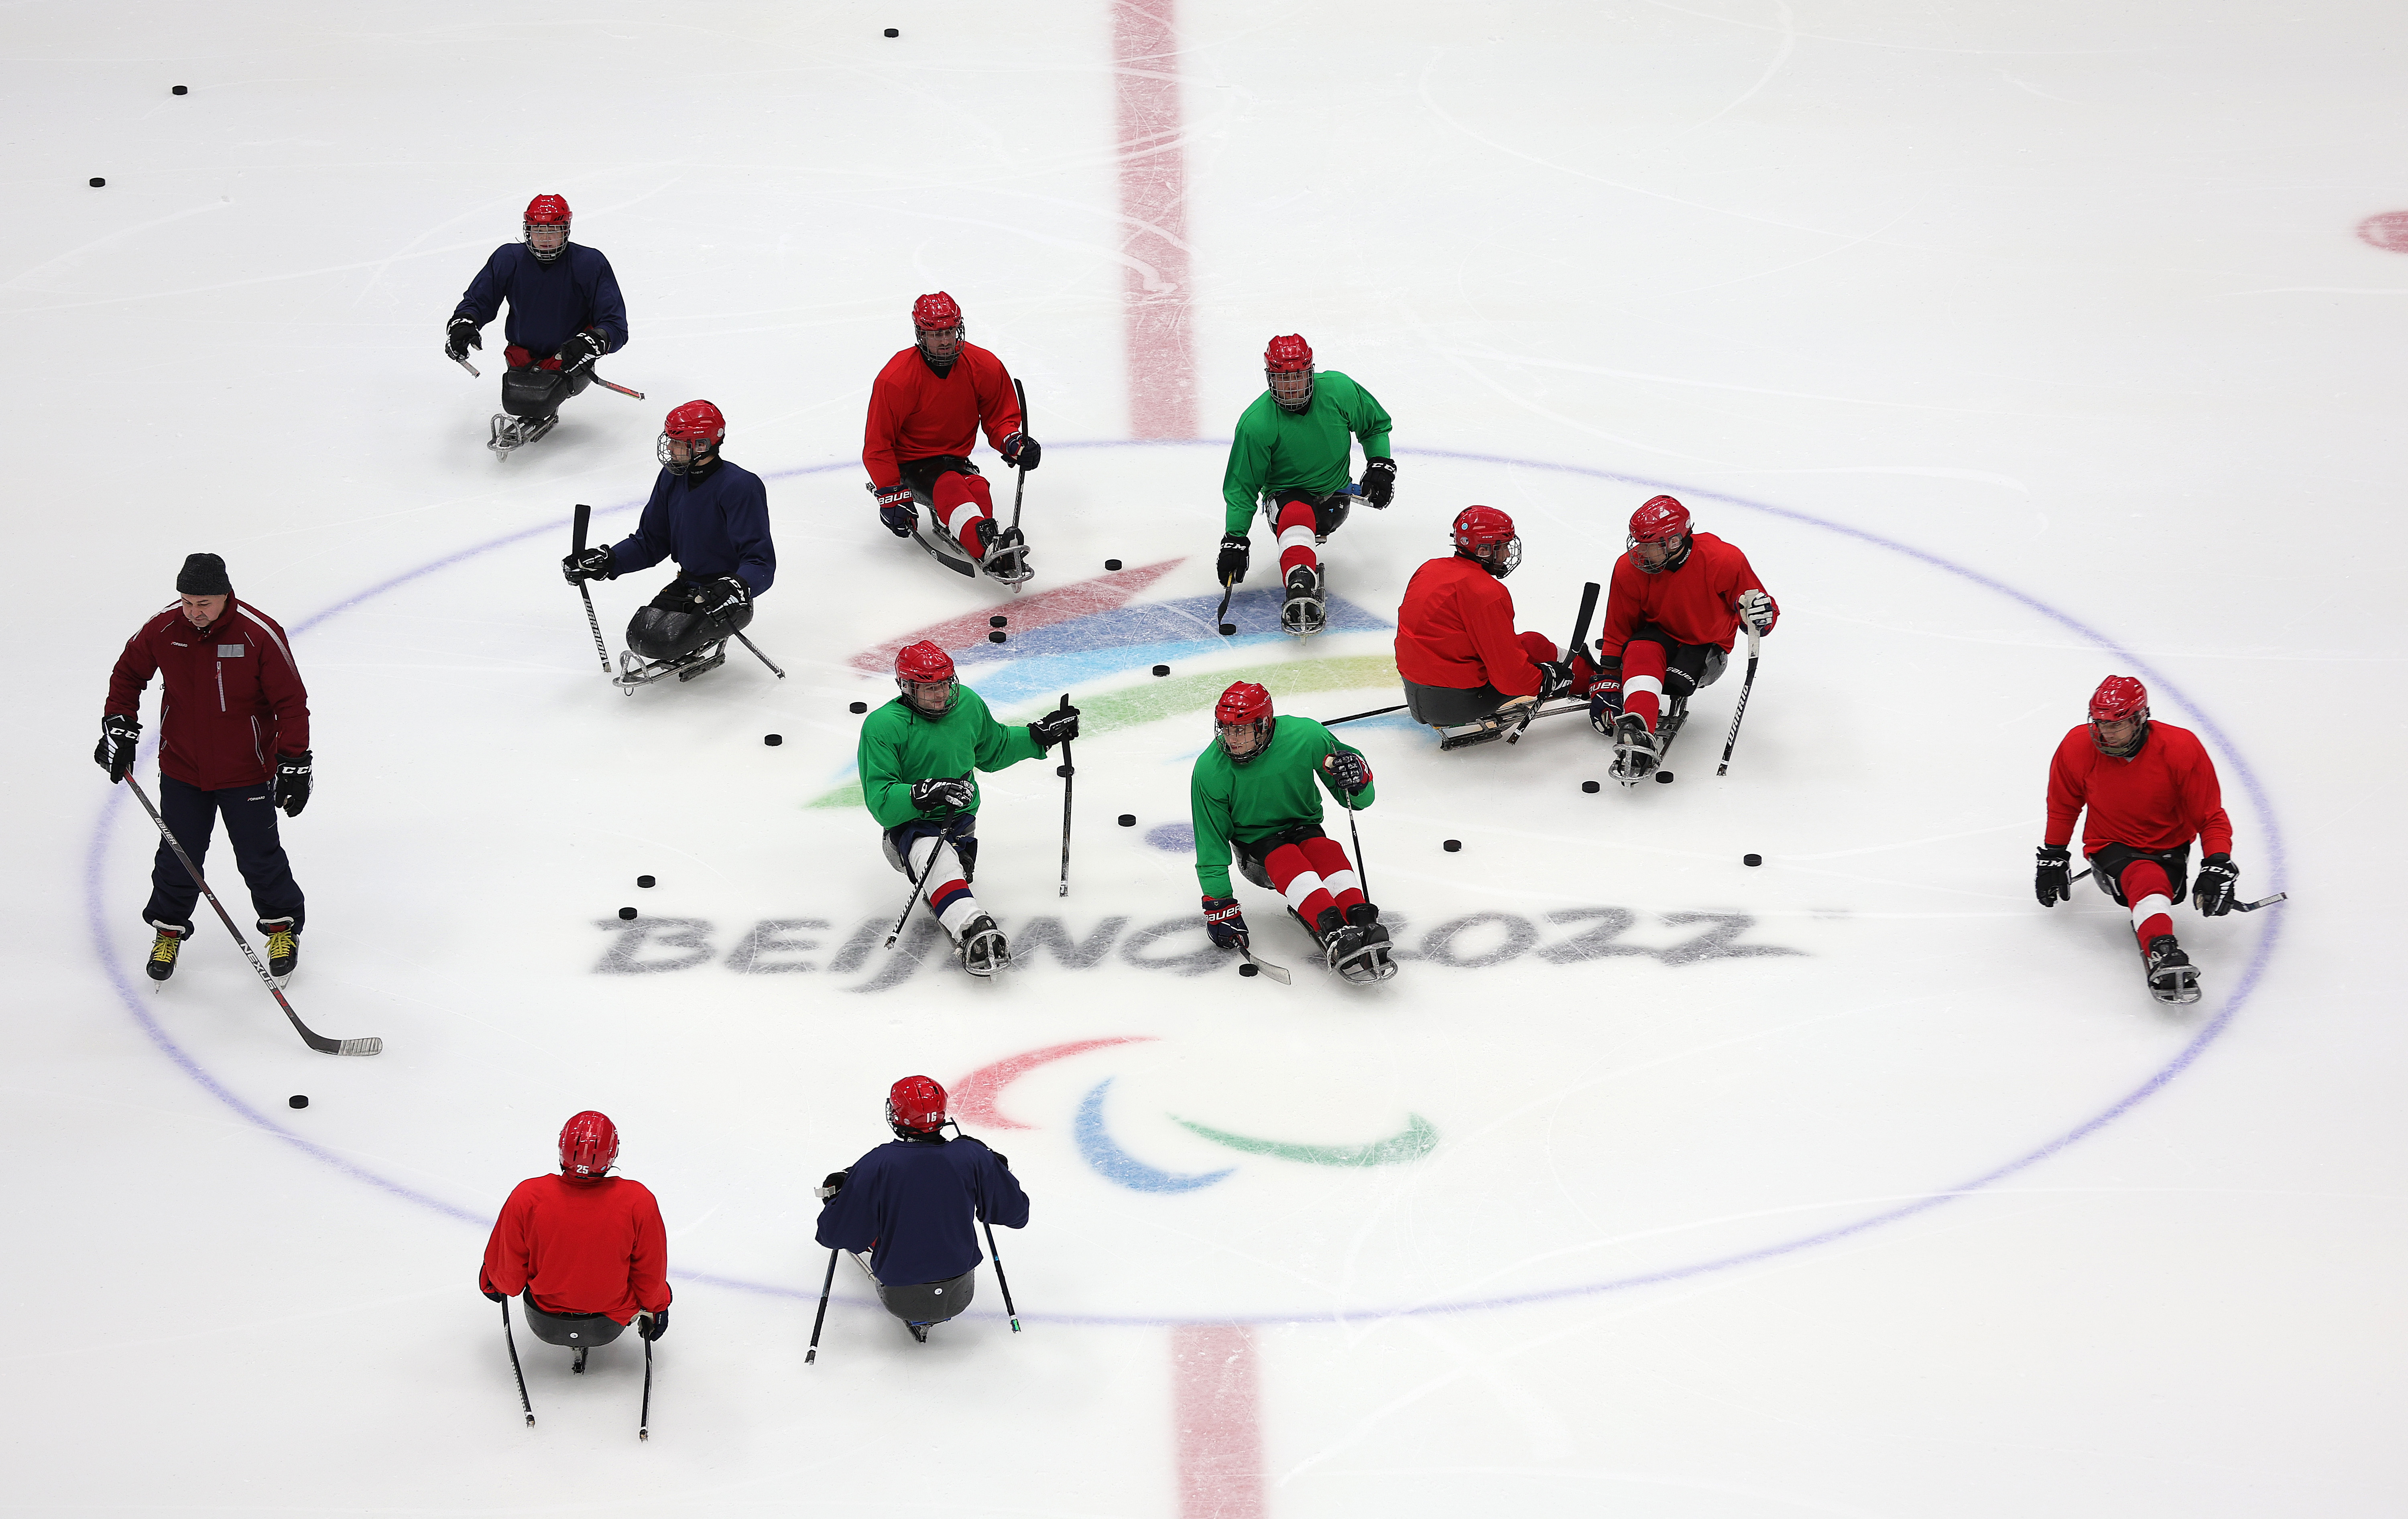 Russian athletes warming up during a Russian Paralympic Committee Para Ice Hockey training session at National Indoor Stadium on March 3, in Beijing, China. They have now been banned from participating in the games.